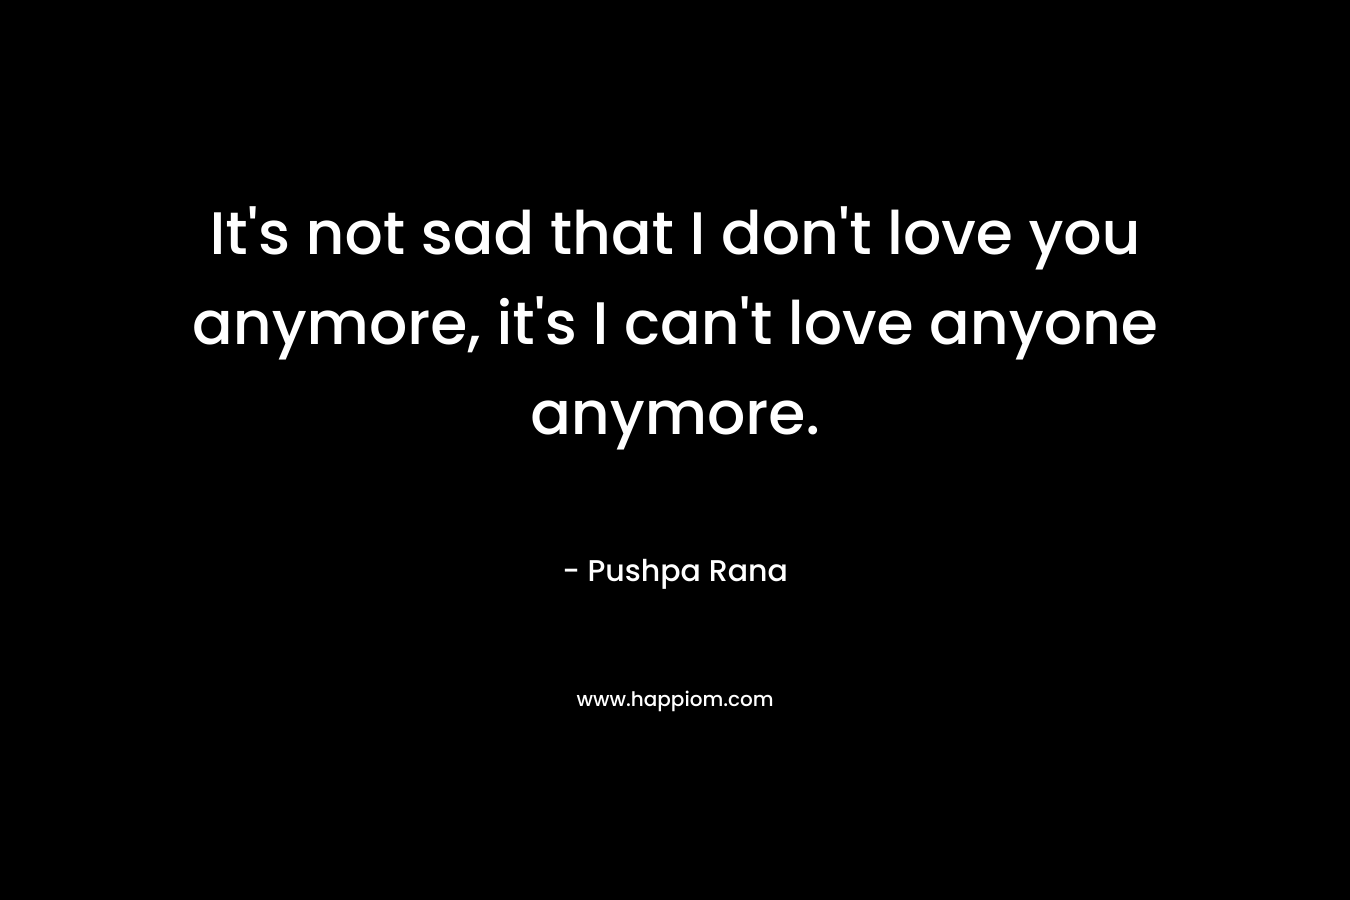 It's not sad that I don't love you anymore, it's I can't love anyone anymore.